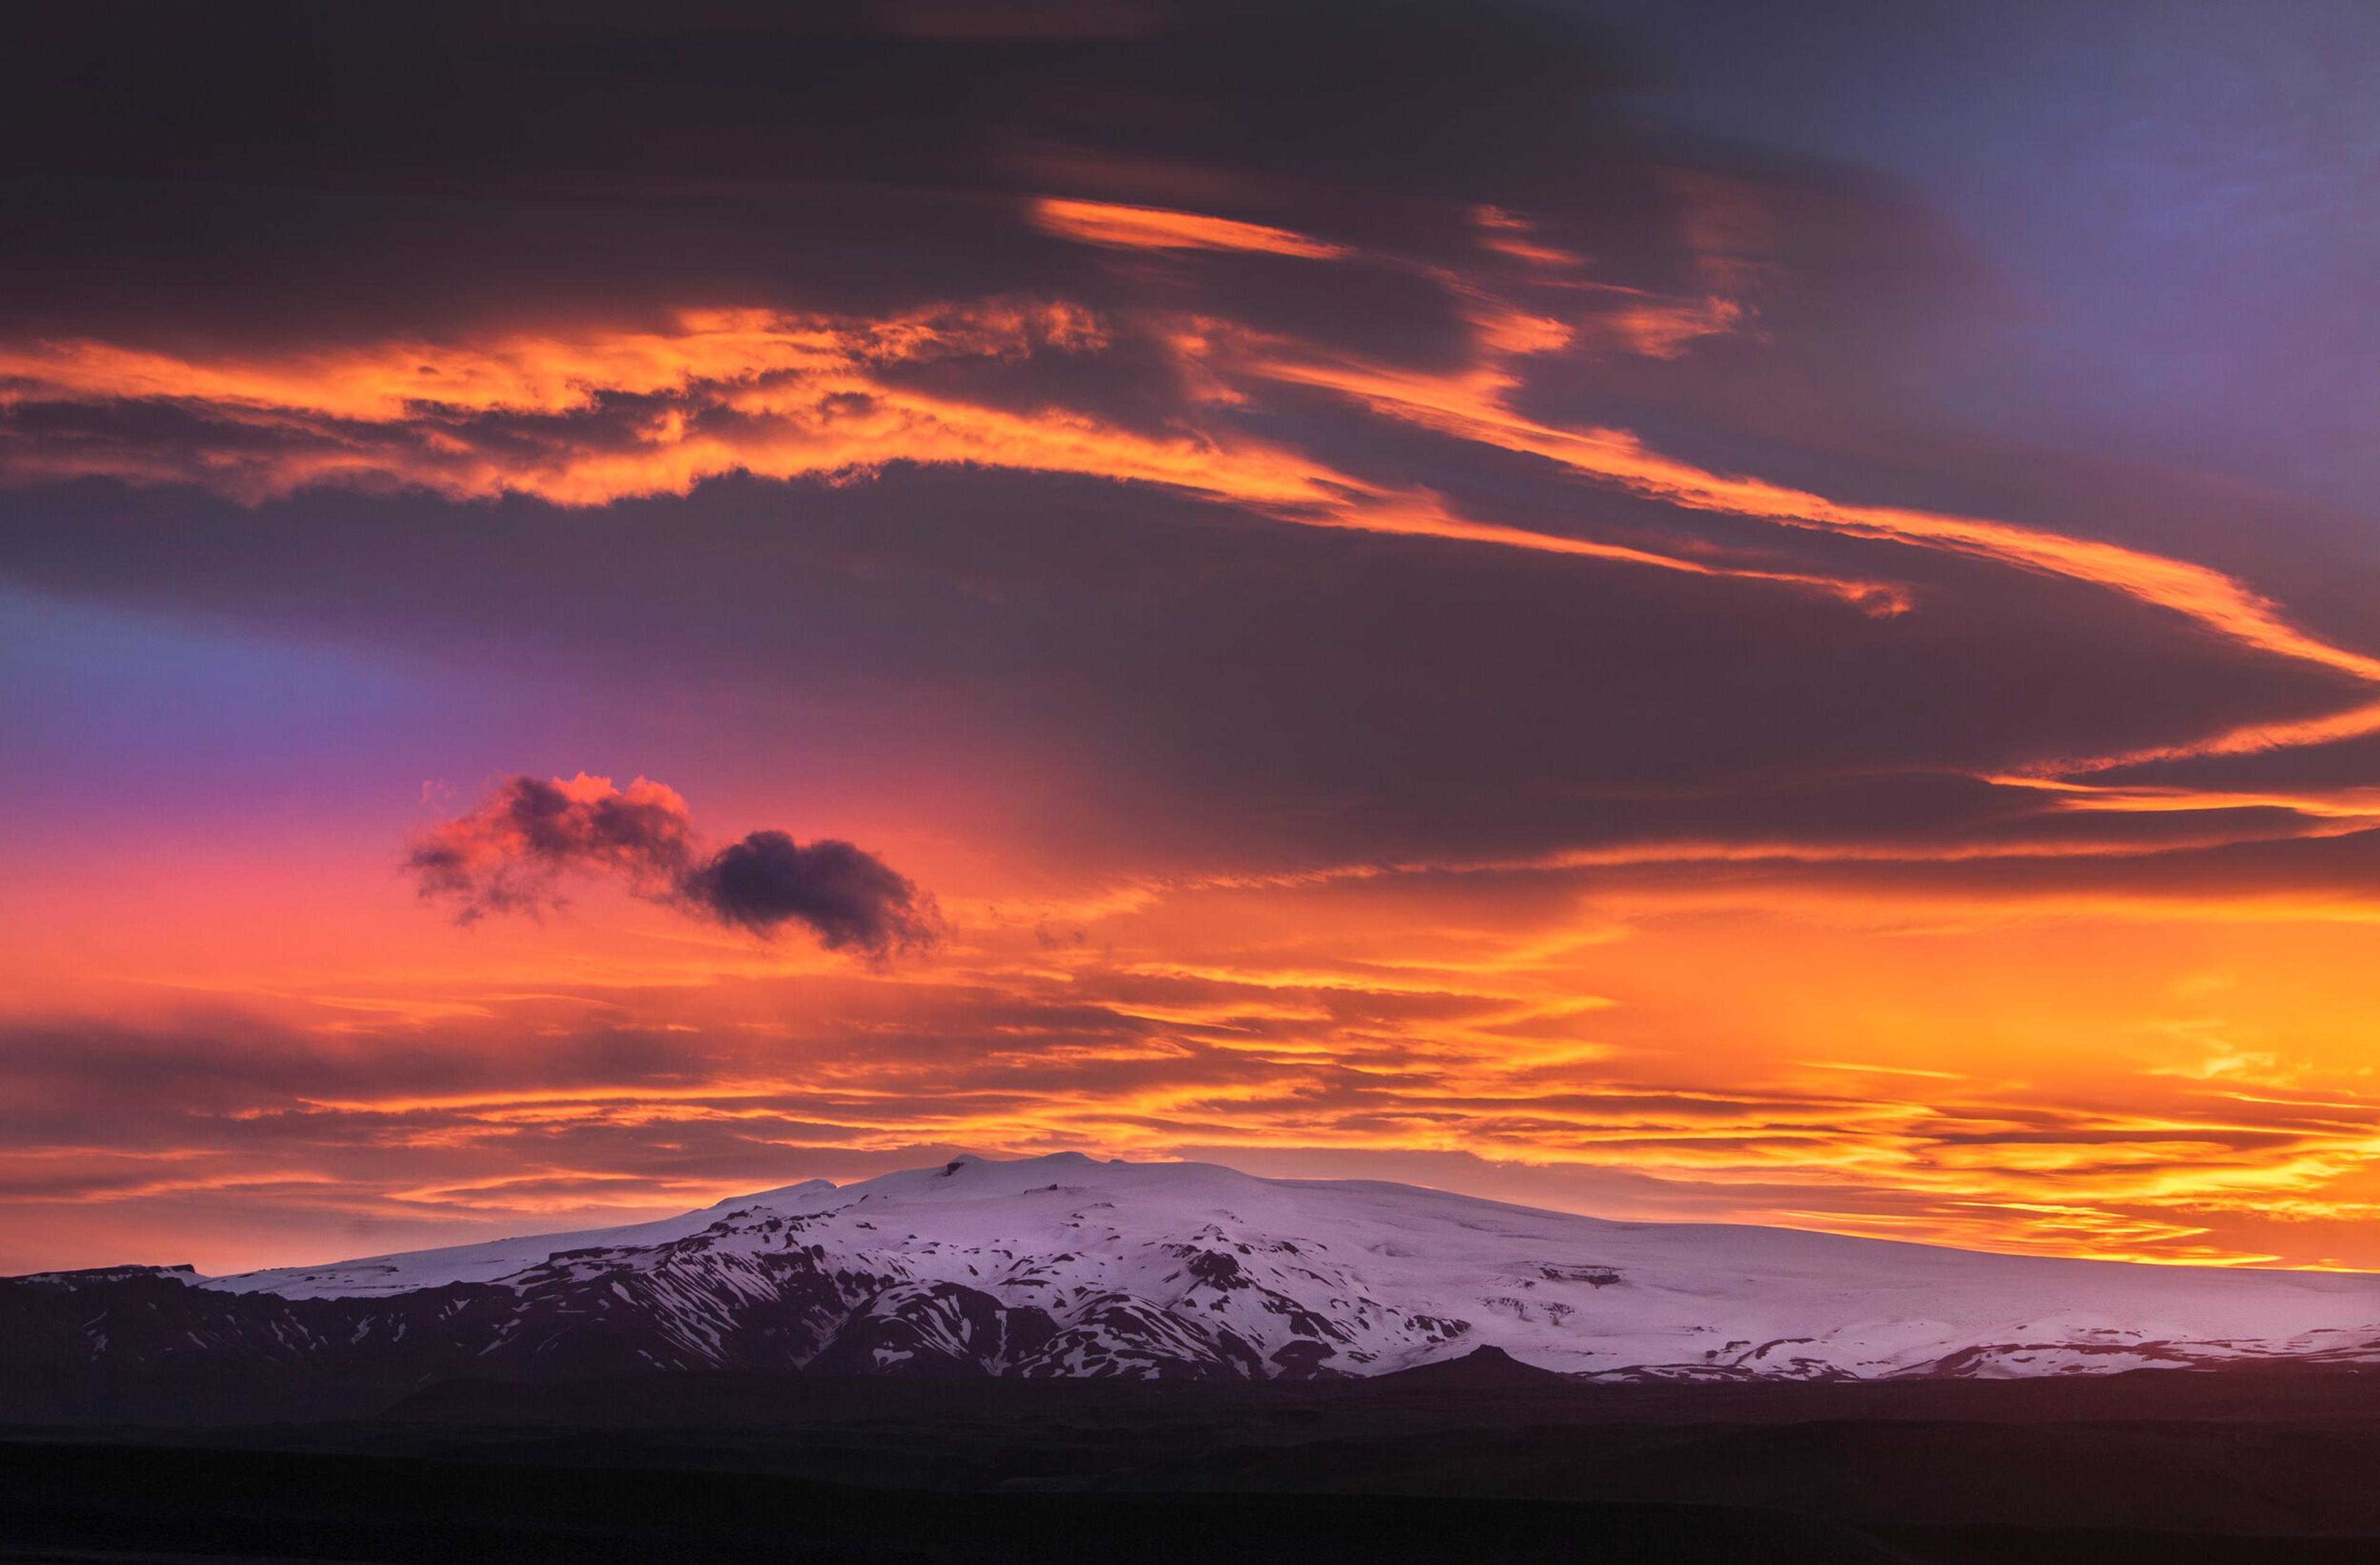 Dramatic sunset sky with fiery clouds over a snow-capped mountain.